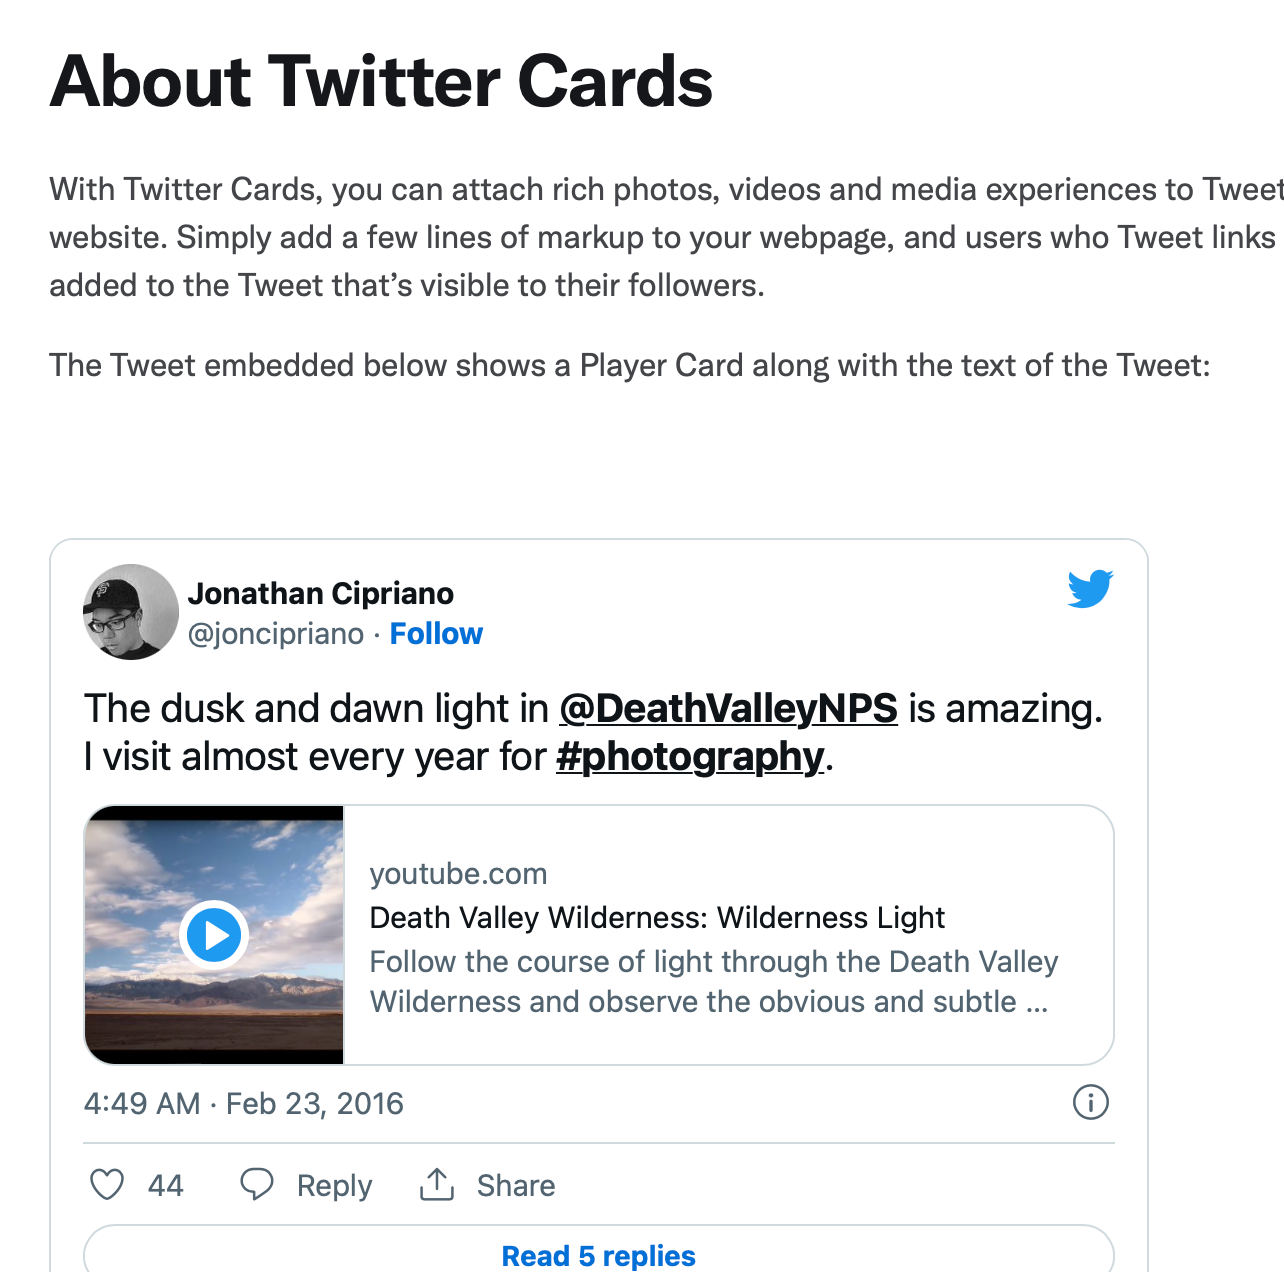 Screenshot of the About Twitter Cards documentation page on Twitter's Development Platform